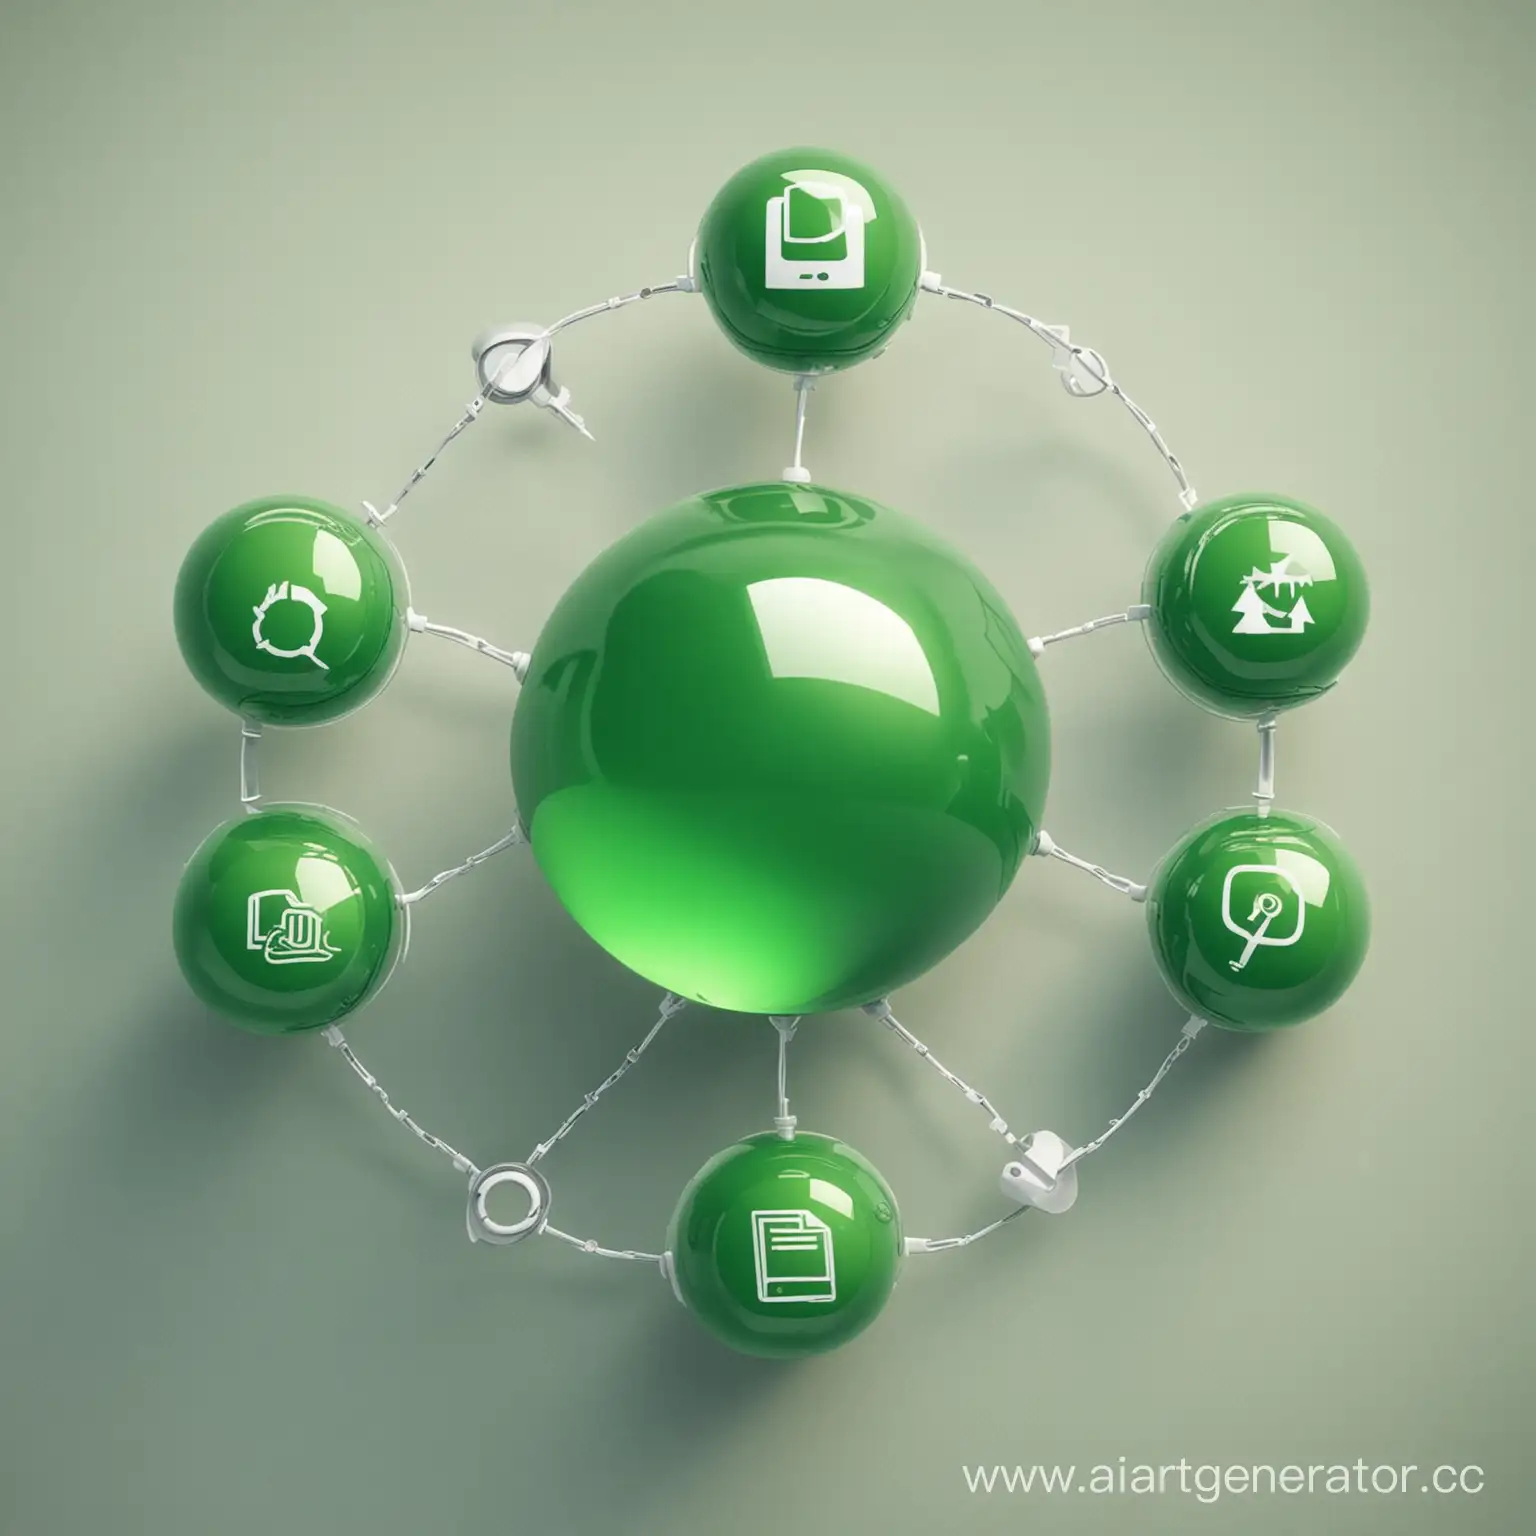 Connected-Application-Icons-Encircled-by-Green-Sphere